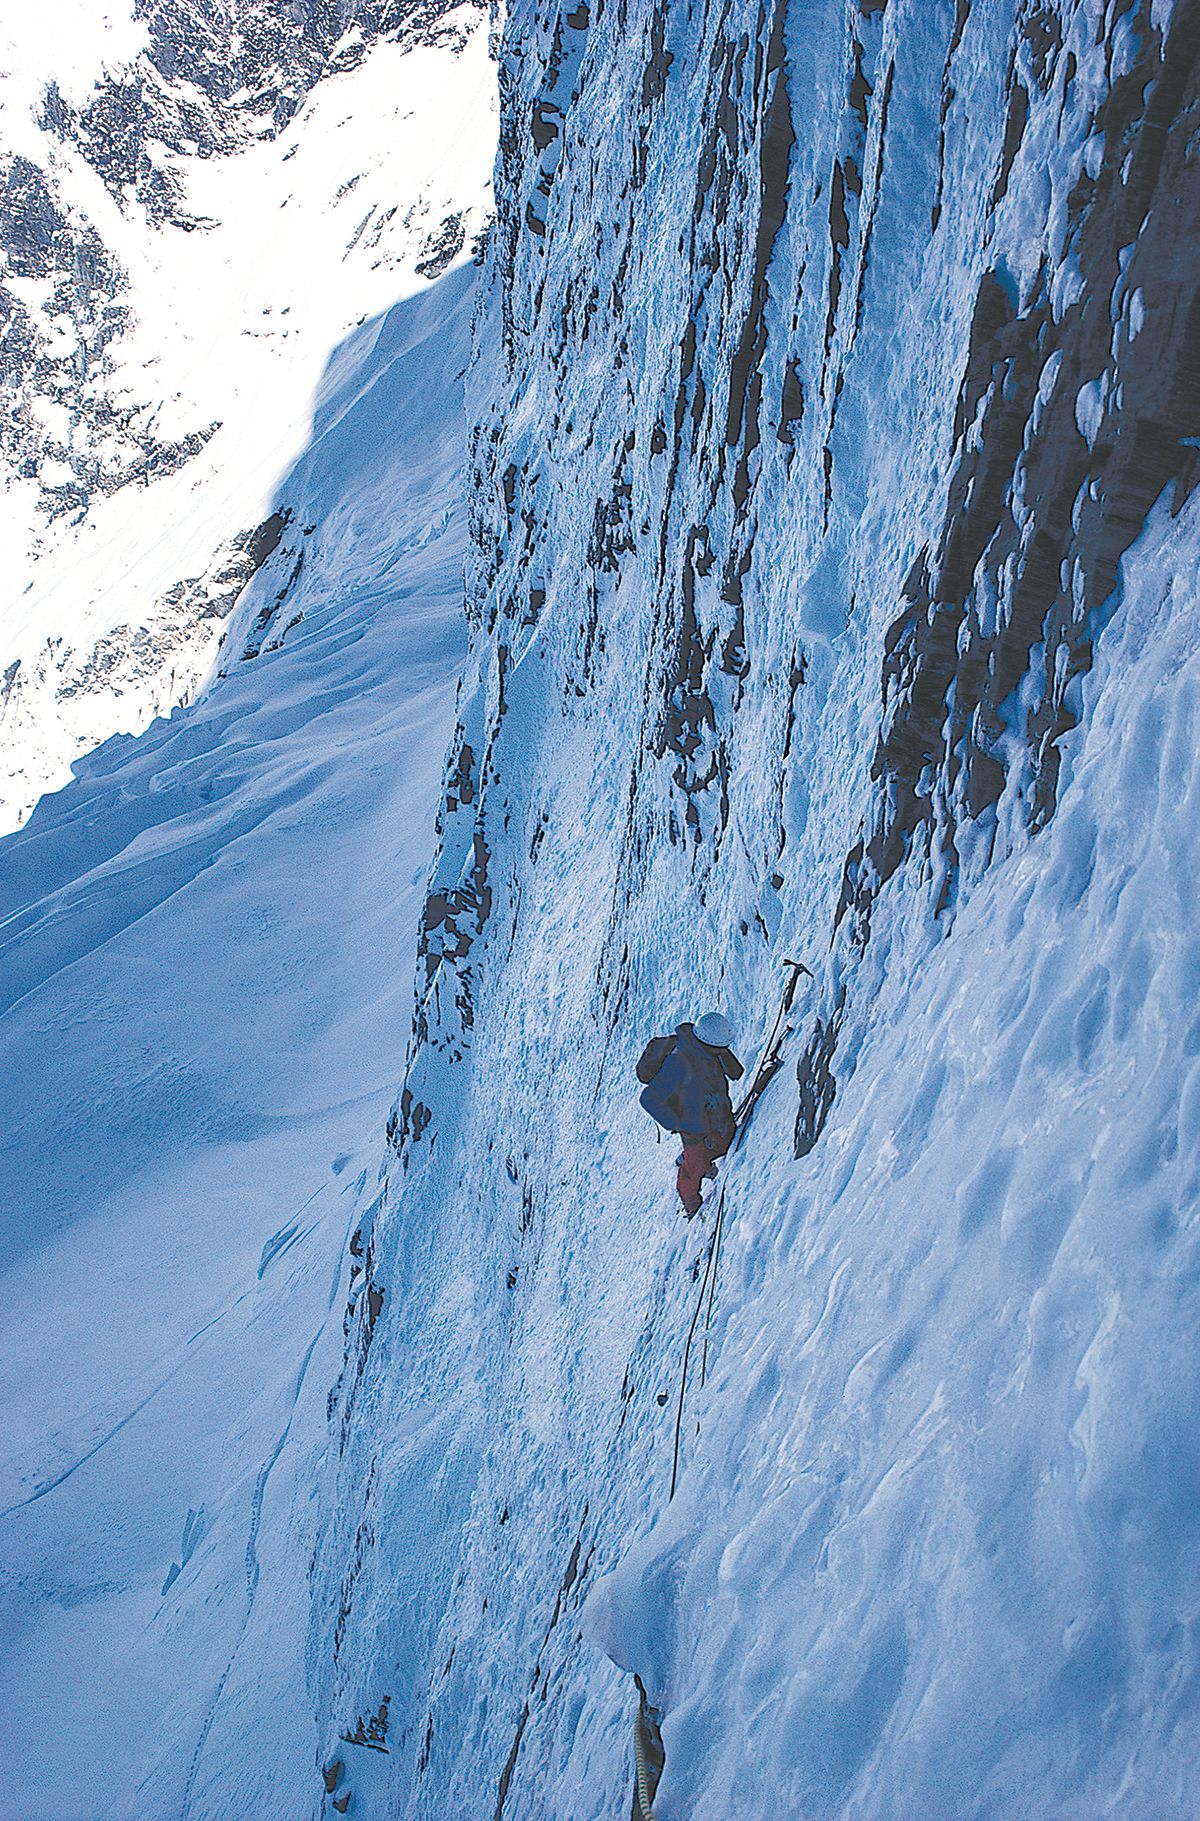 A climber on steep ice, part way up the face.